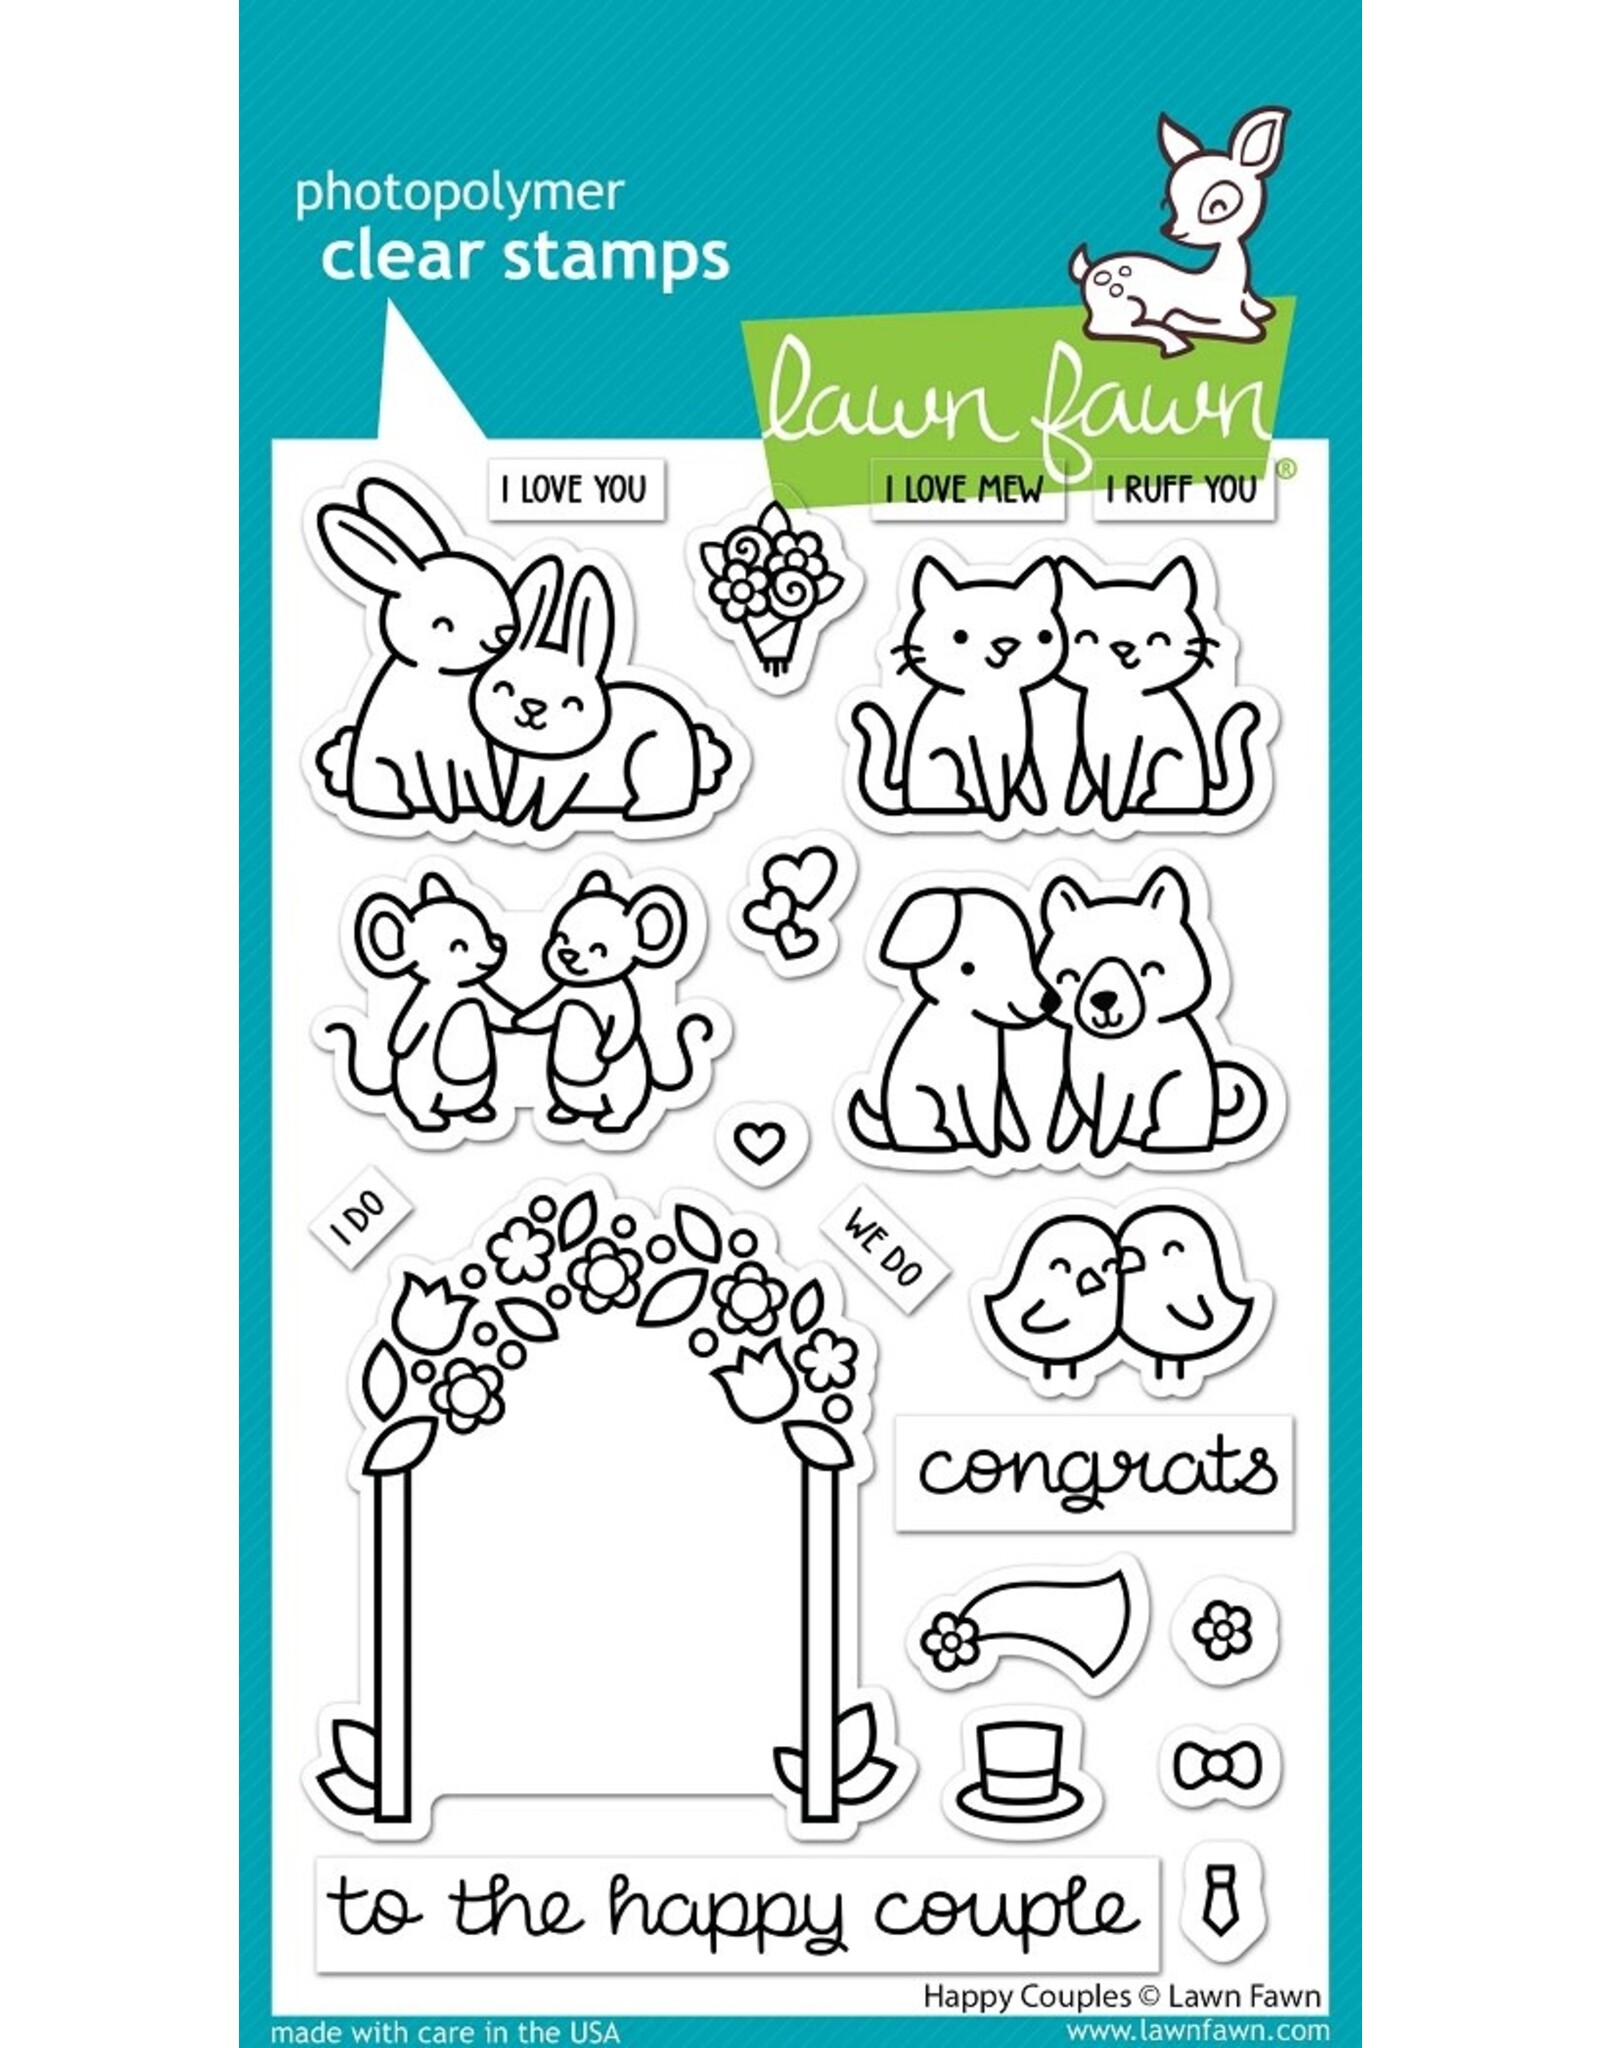 Lawn Fawn happy couples Stamp